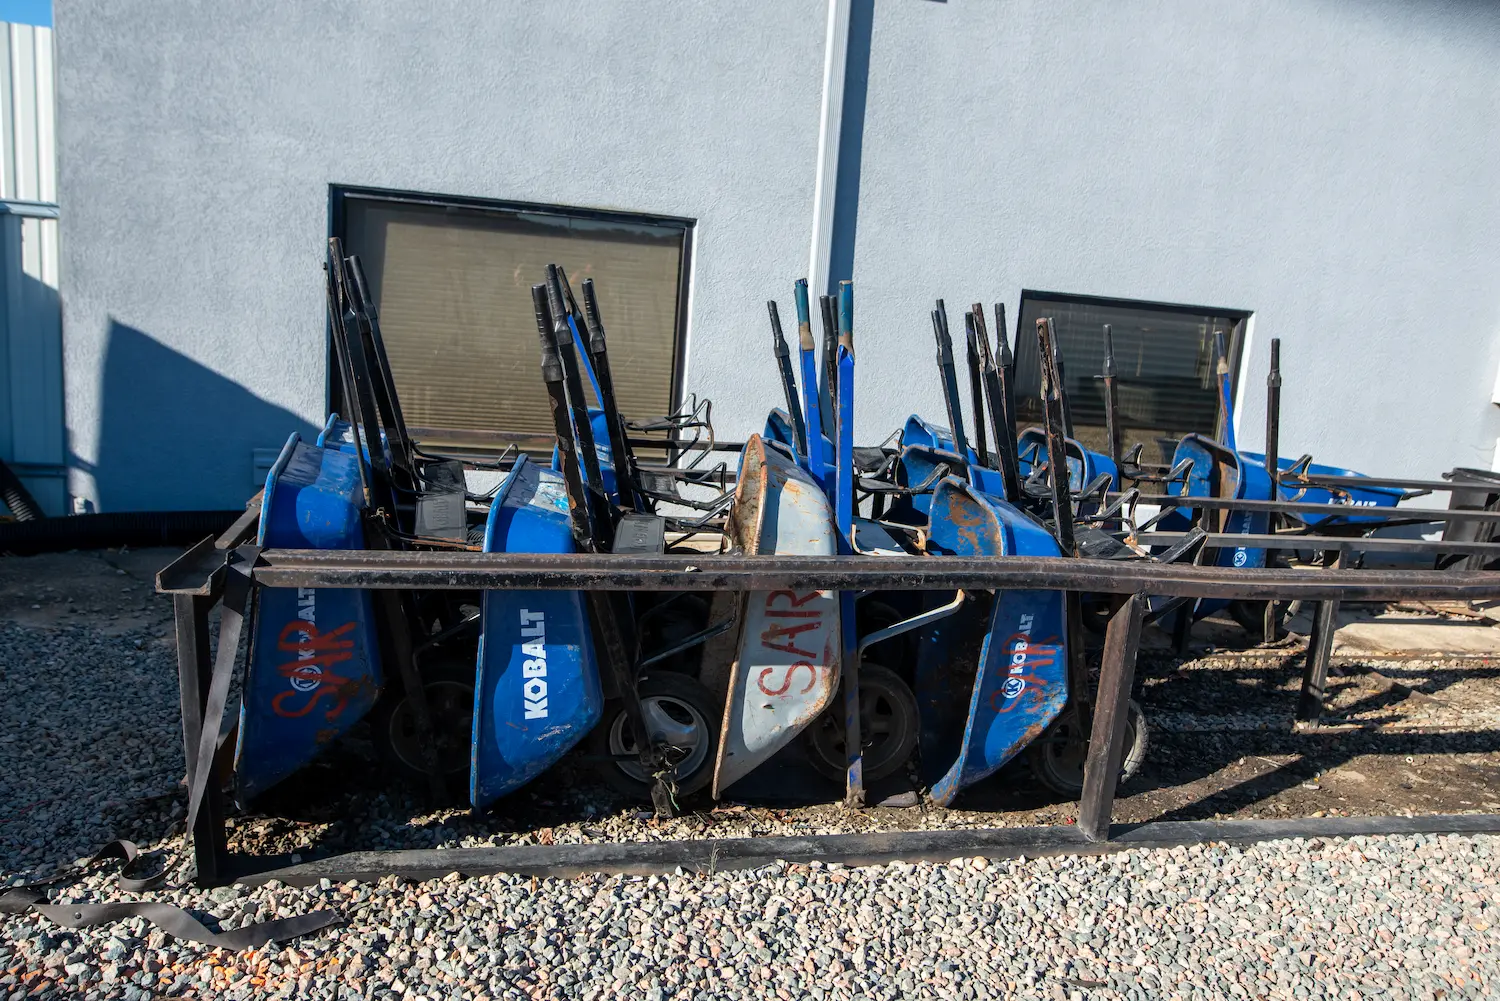 Wheelbarrows ready to be used for picking parts